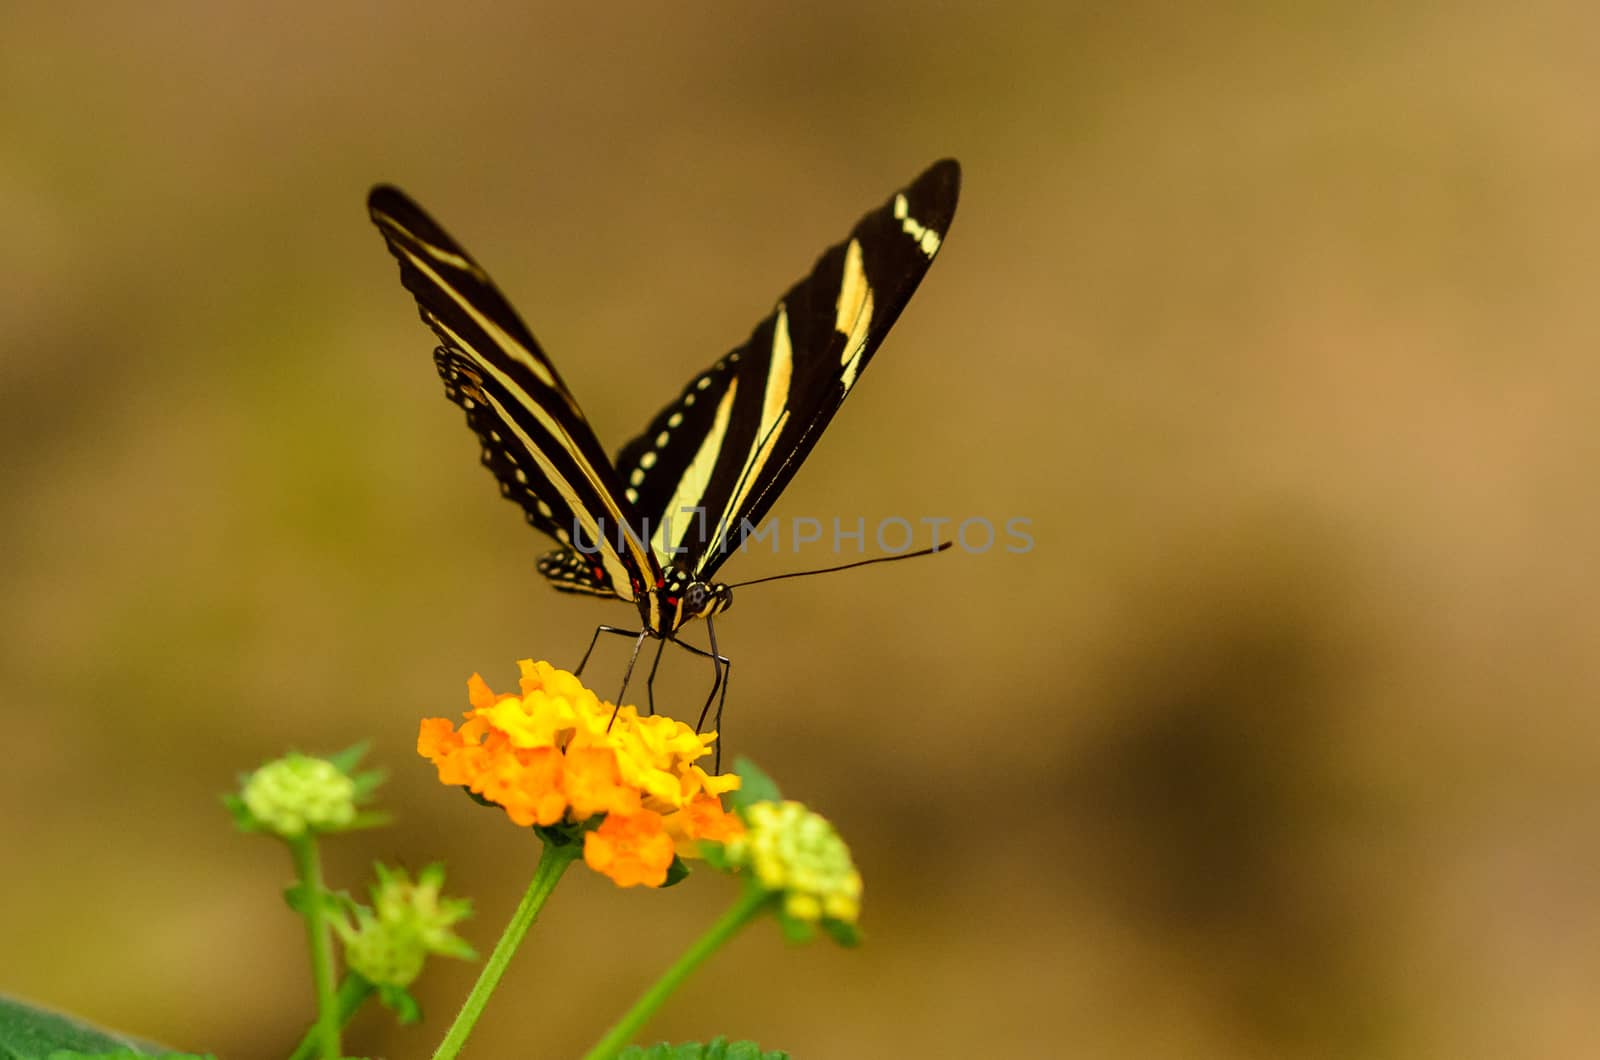 Beatiful striped buttefly ready to take of from yellow flower